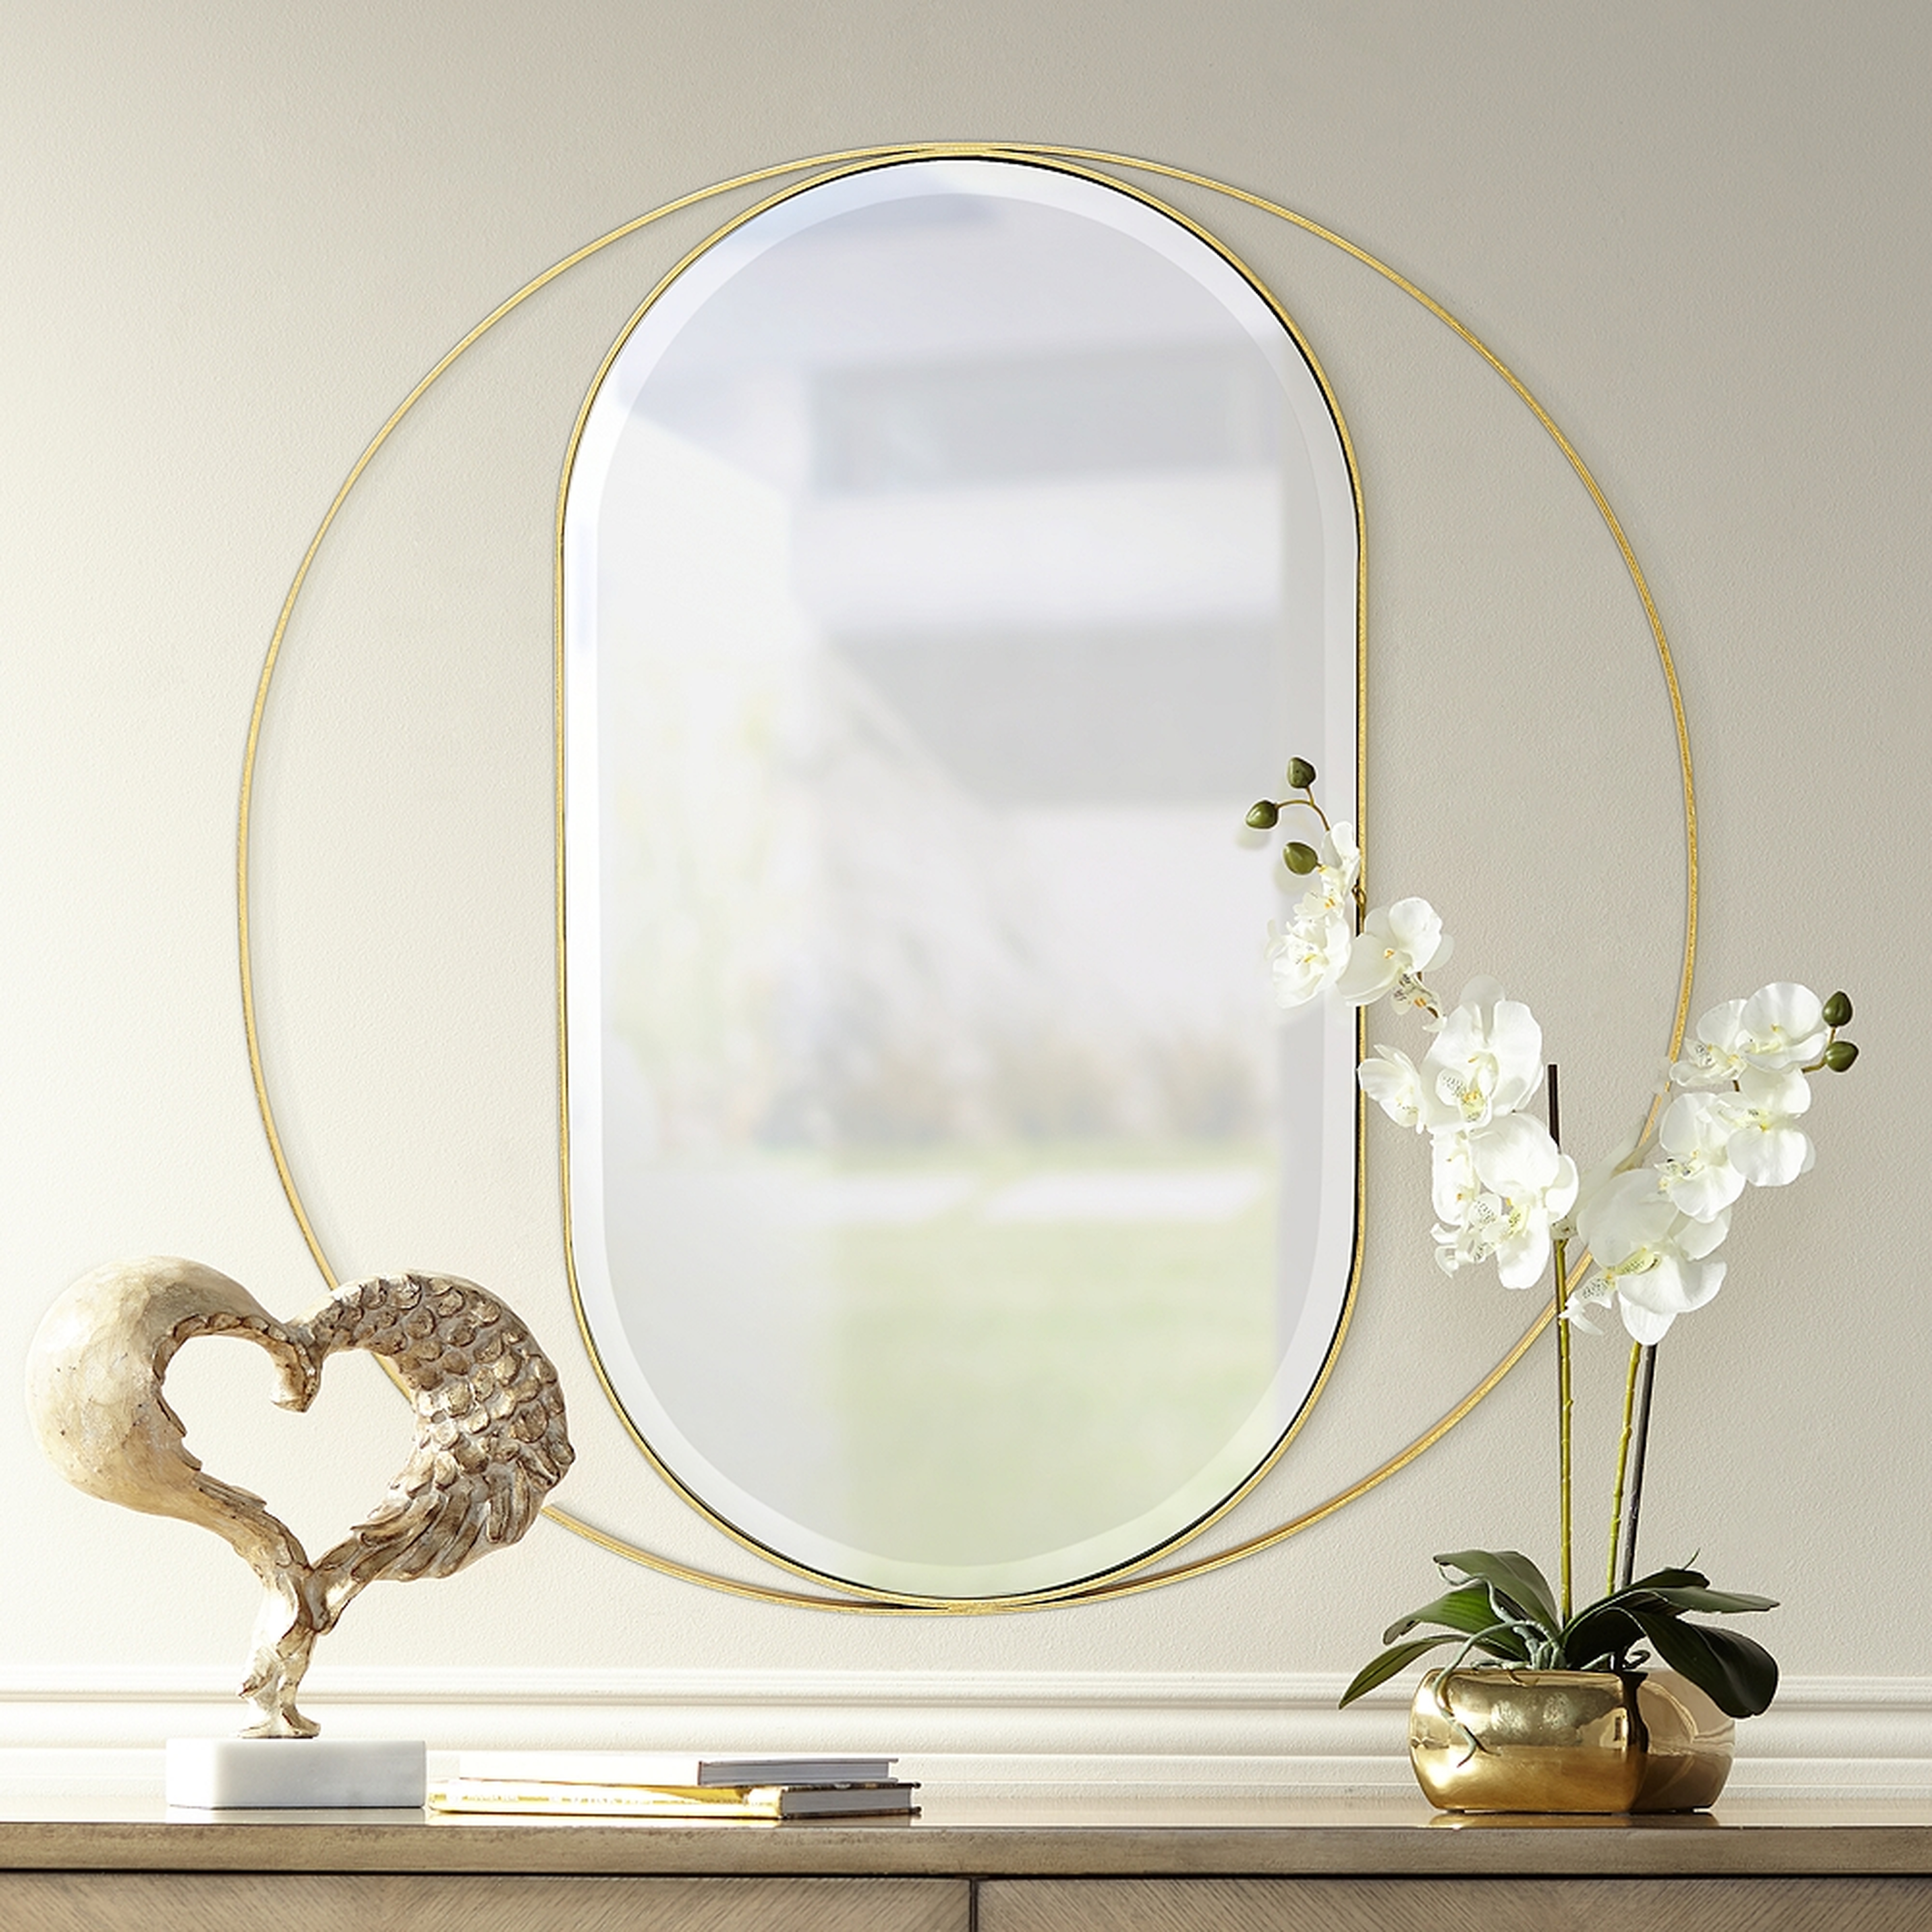 Maisha 33" Round Gold Frame Oval Wall Mirror - Style # 69X36 - Lamps Plus